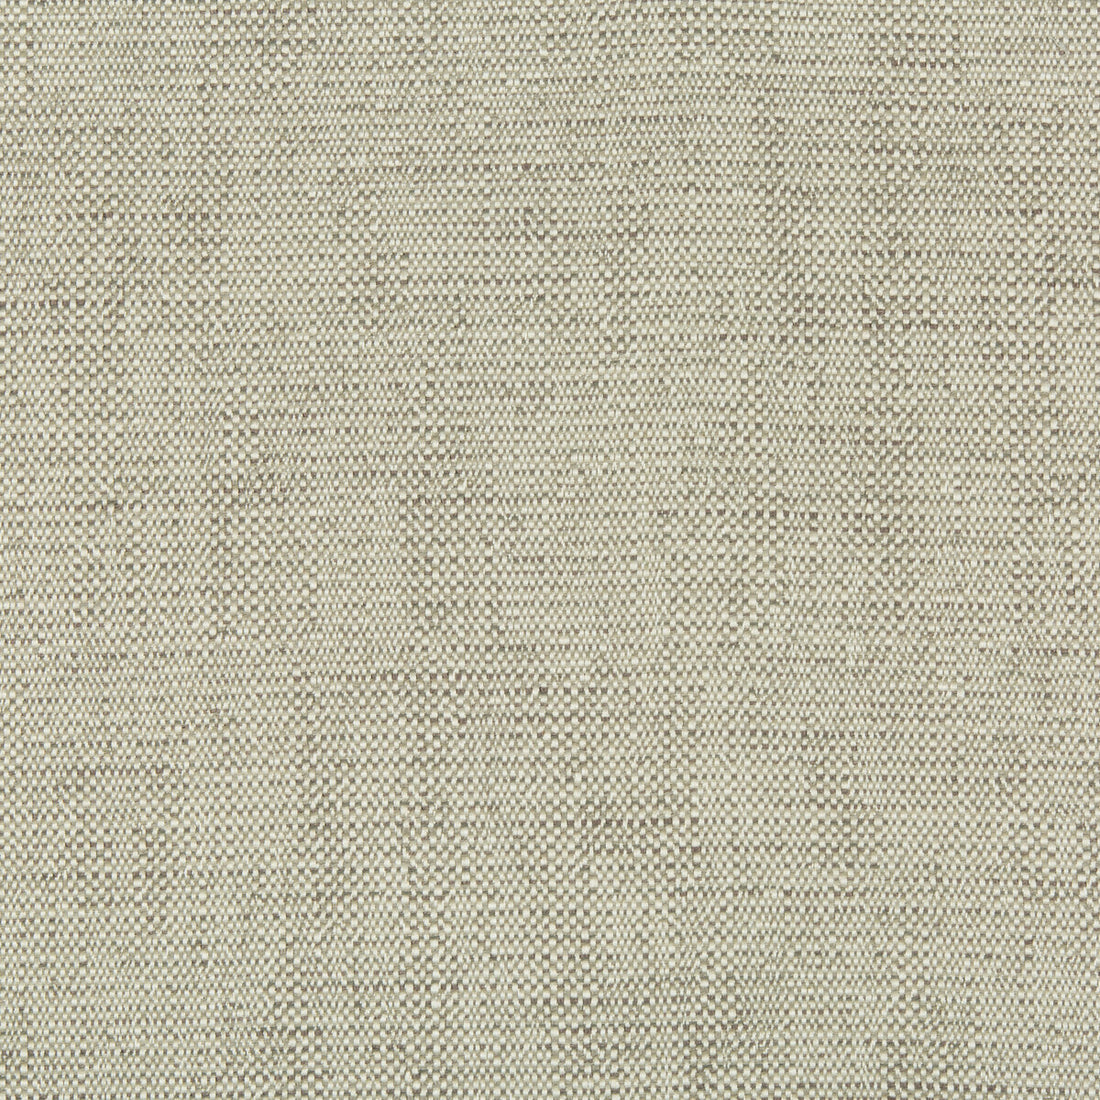 Kravet Contract fabric in 35132-11 color - pattern 35132.11.0 - by Kravet Contract in the Incase Crypton Gis collection